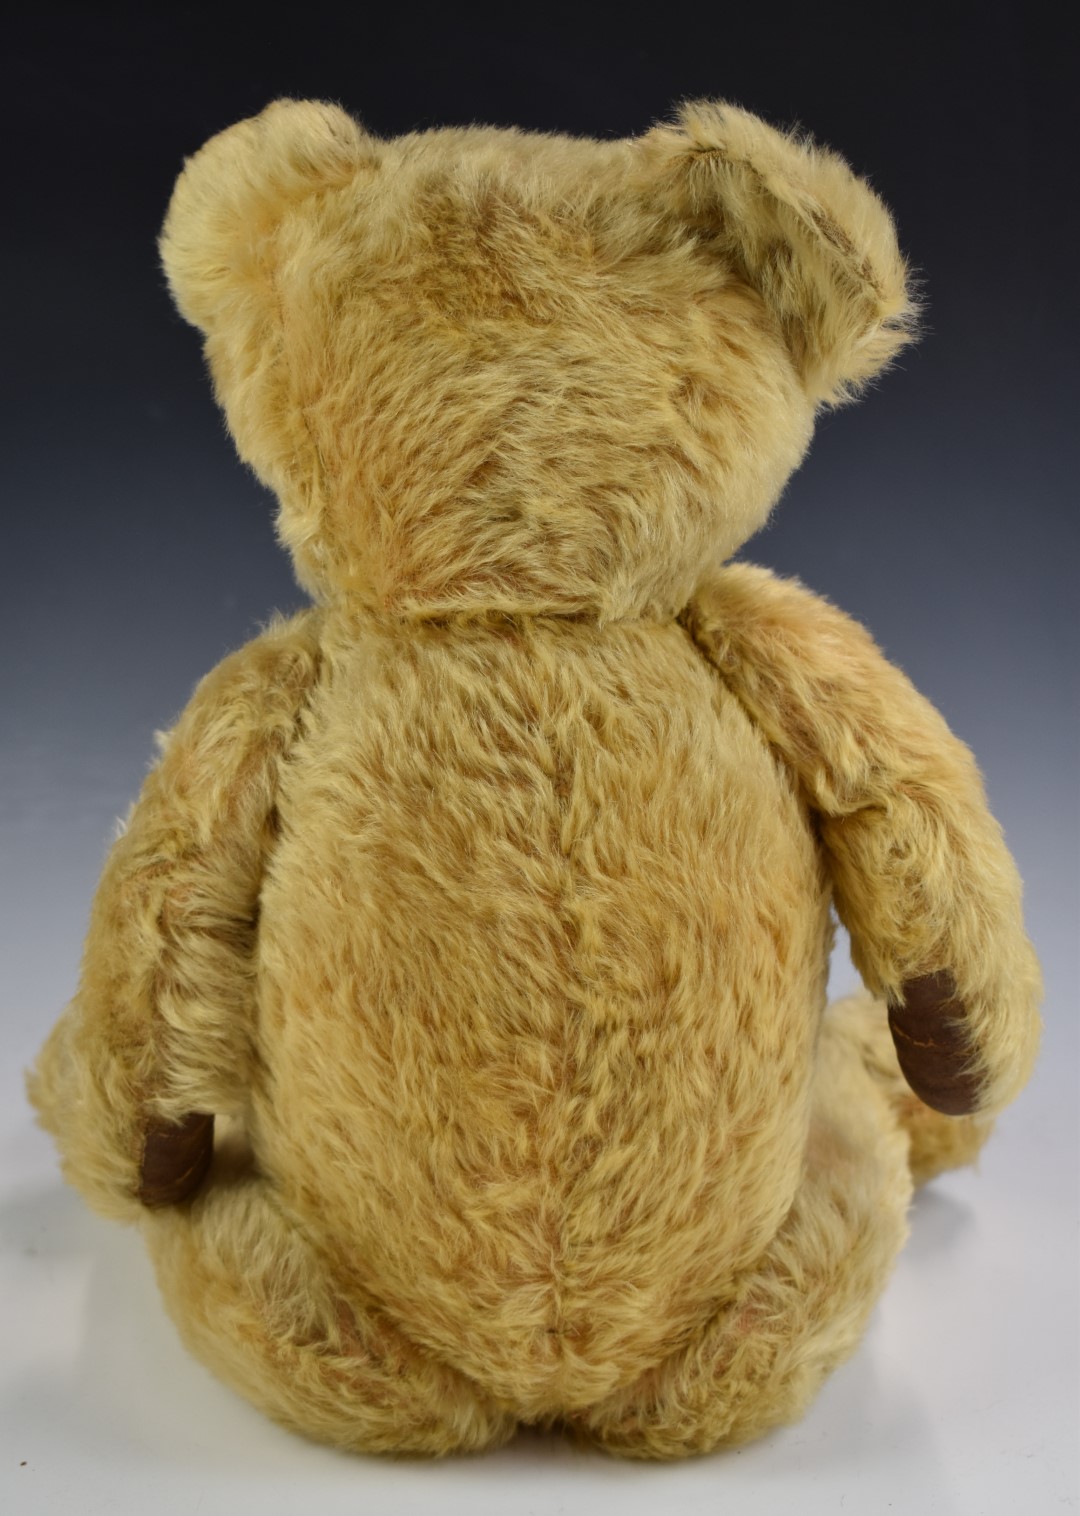 Fadap French Teddy bear with golden mohair, straw filling, disc joints, leather pads and stitched - Image 3 of 4